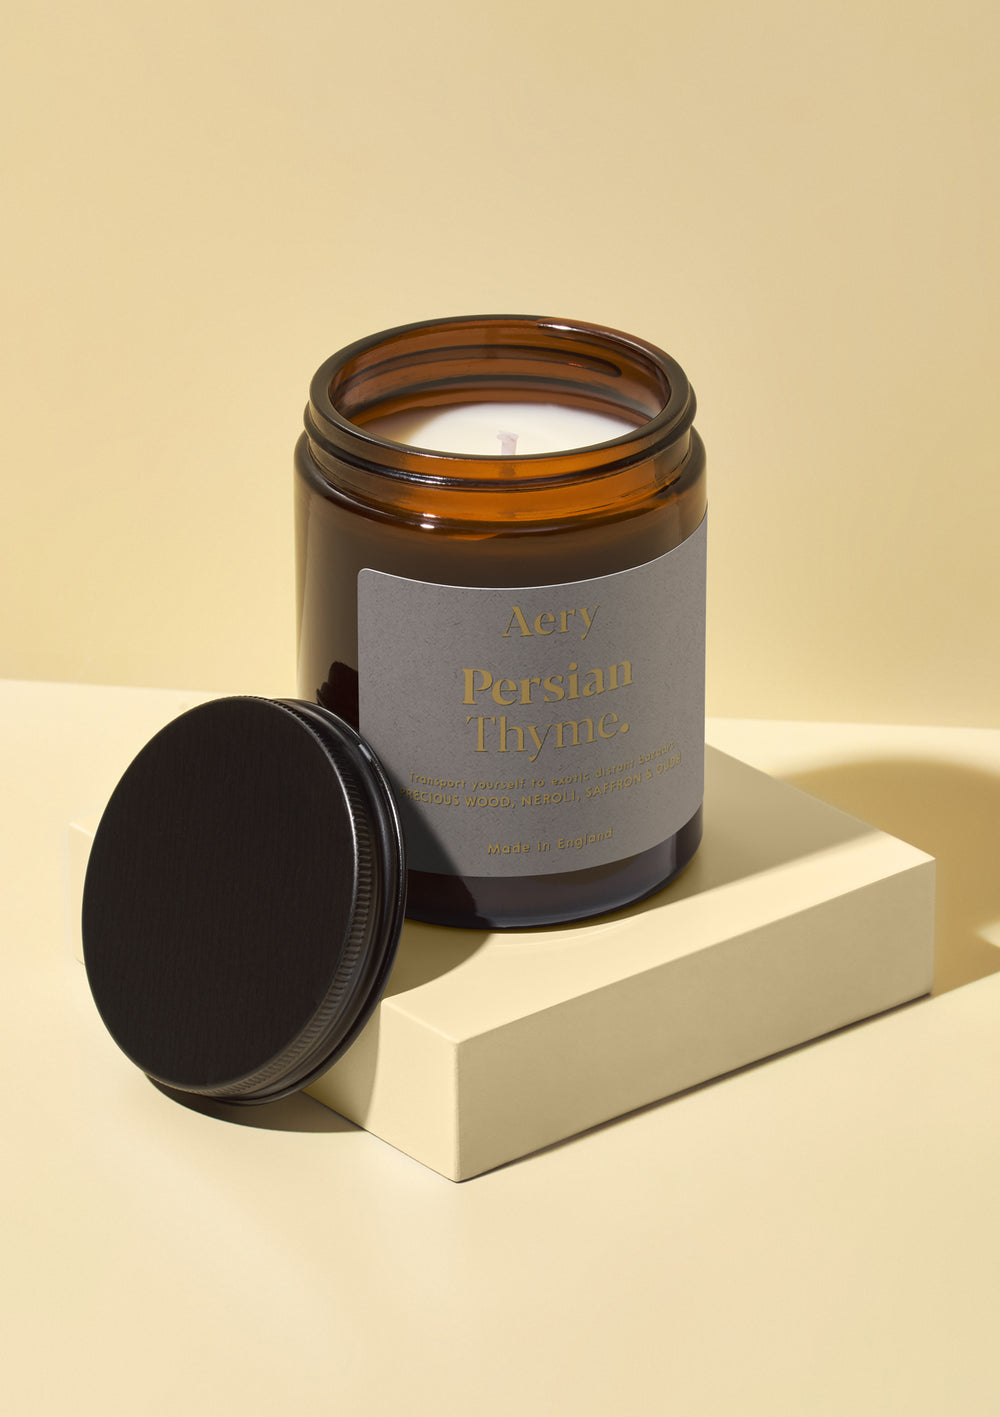 PERSIAN THYME SCENTED JAR CANDLE - NEROLI SAFFRON AND OUDH